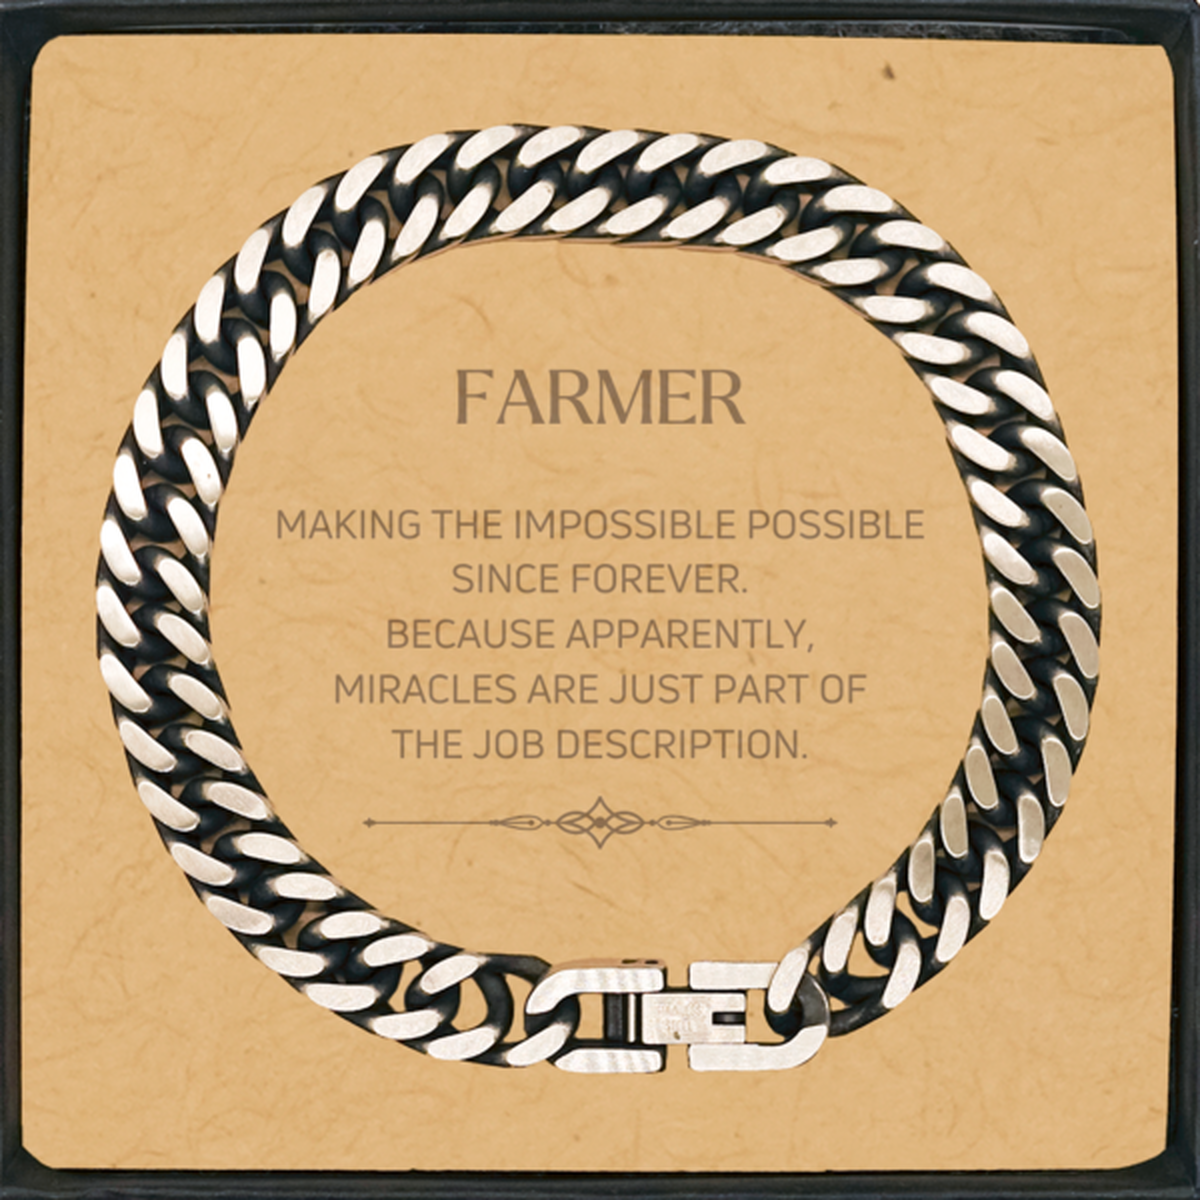 Funny Farmer Gifts, Miracles are just part of the job description, Inspirational Birthday Cuban Link Chain Bracelet For Farmer, Men, Women, Coworkers, Friends, Boss